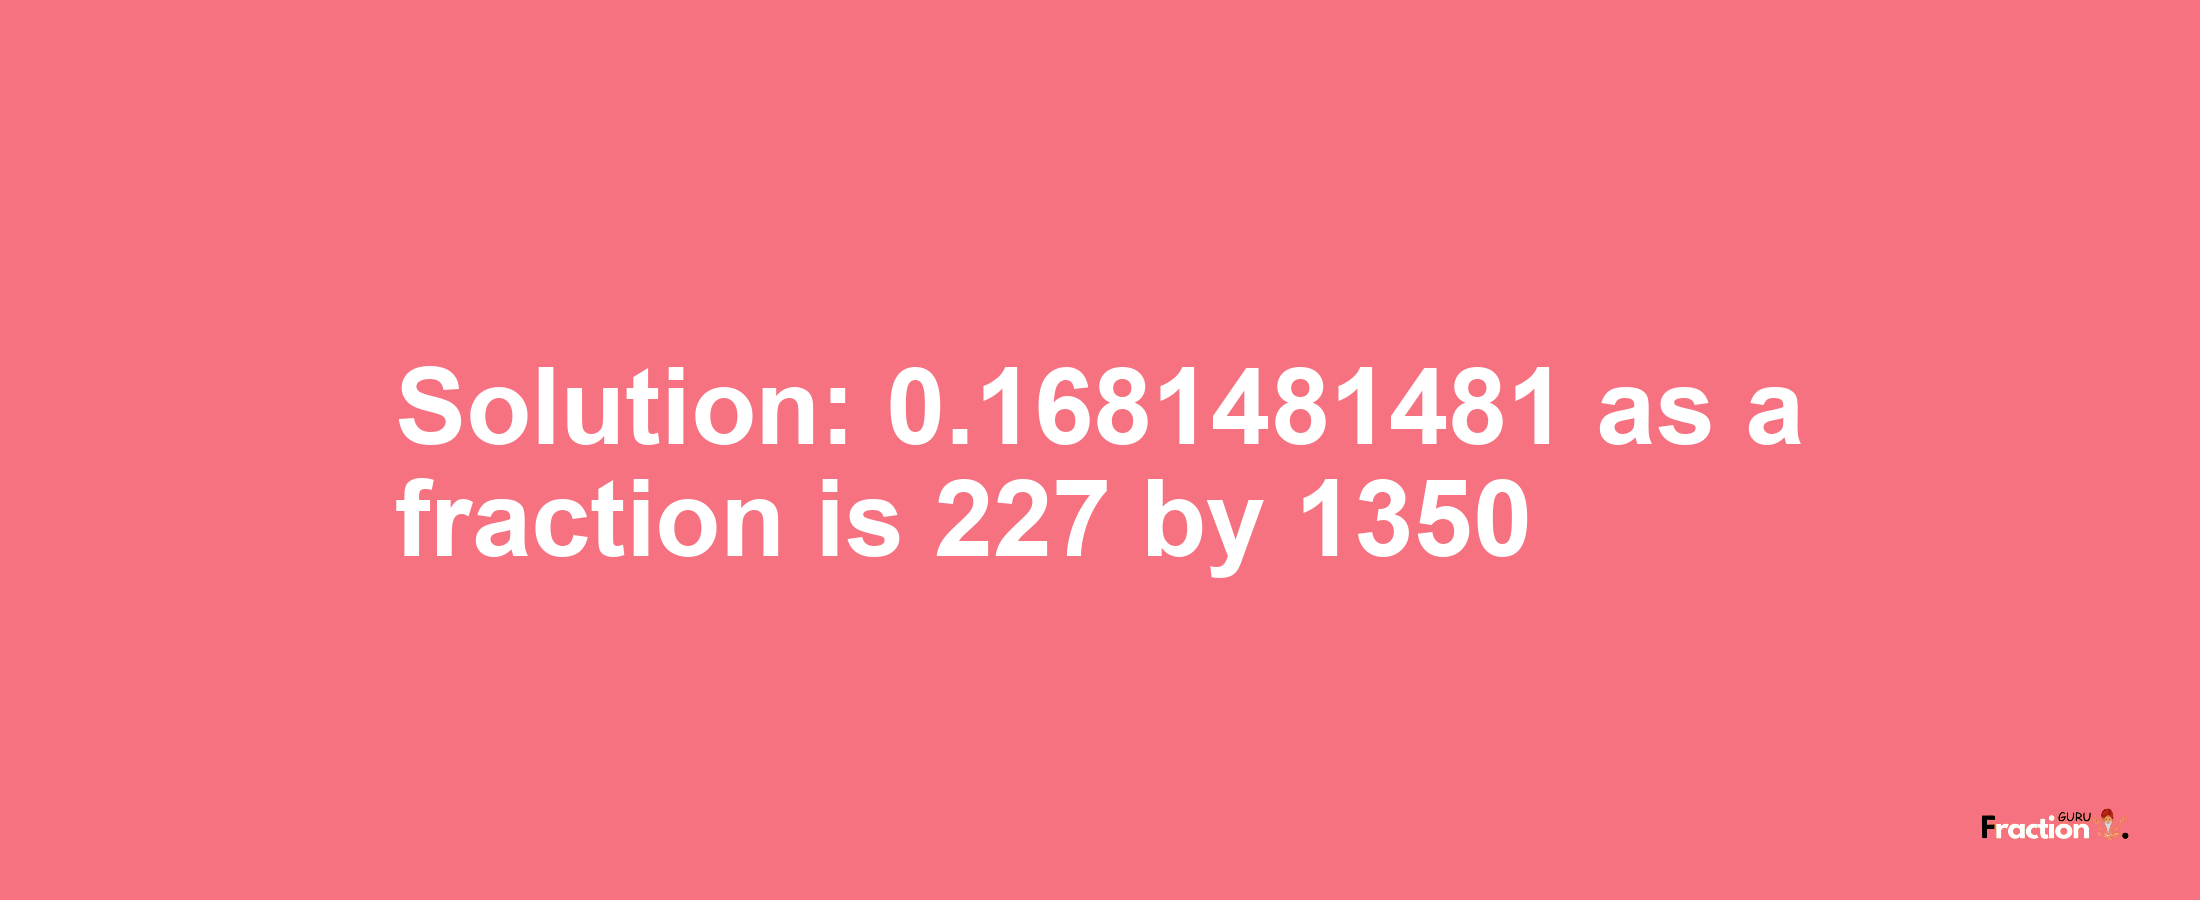 Solution:0.1681481481 as a fraction is 227/1350